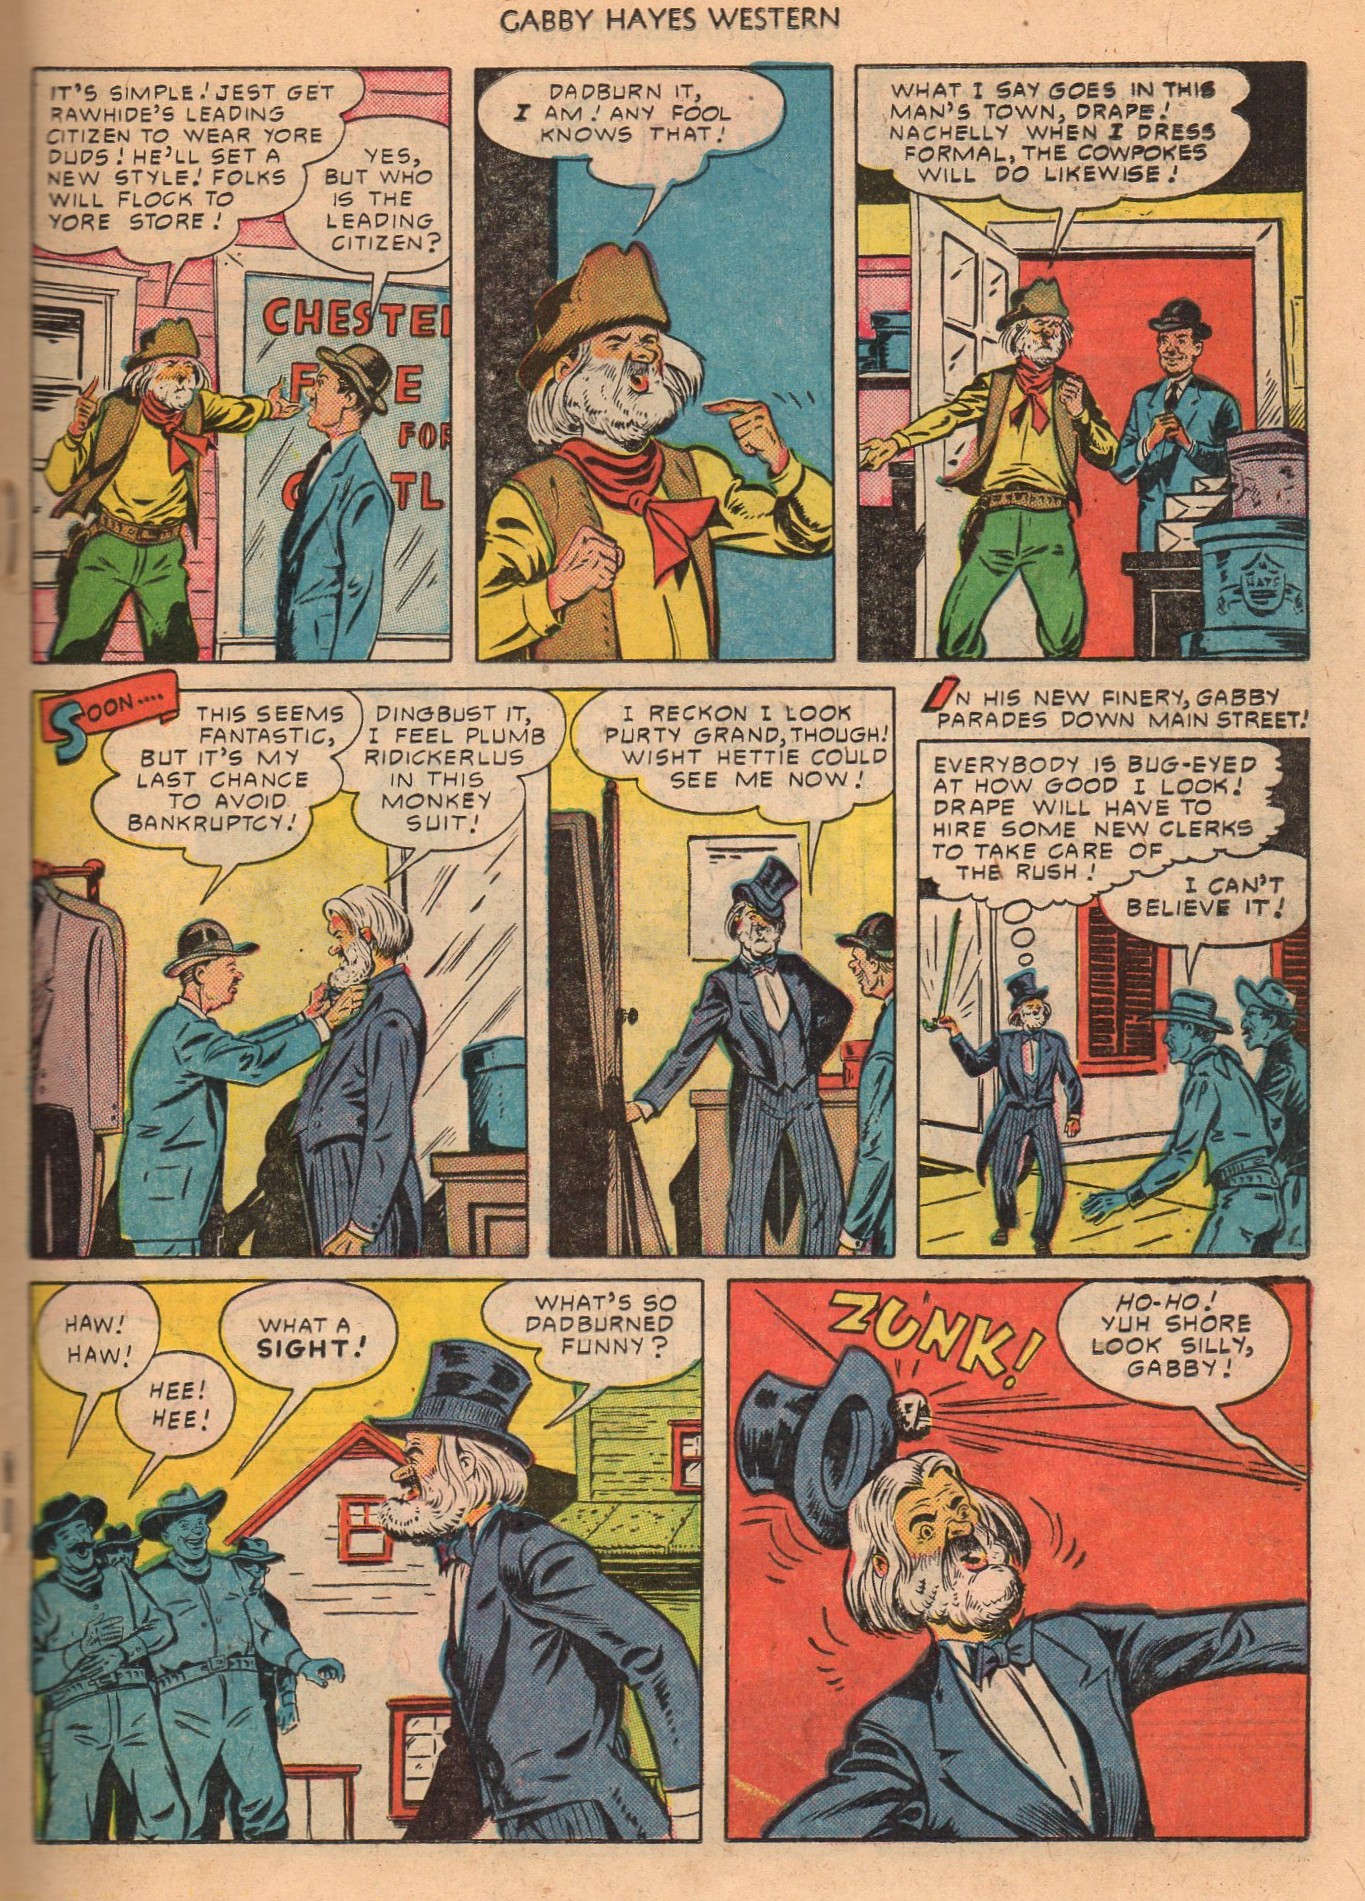 Read online Gabby Hayes Western comic -  Issue #21 - 27